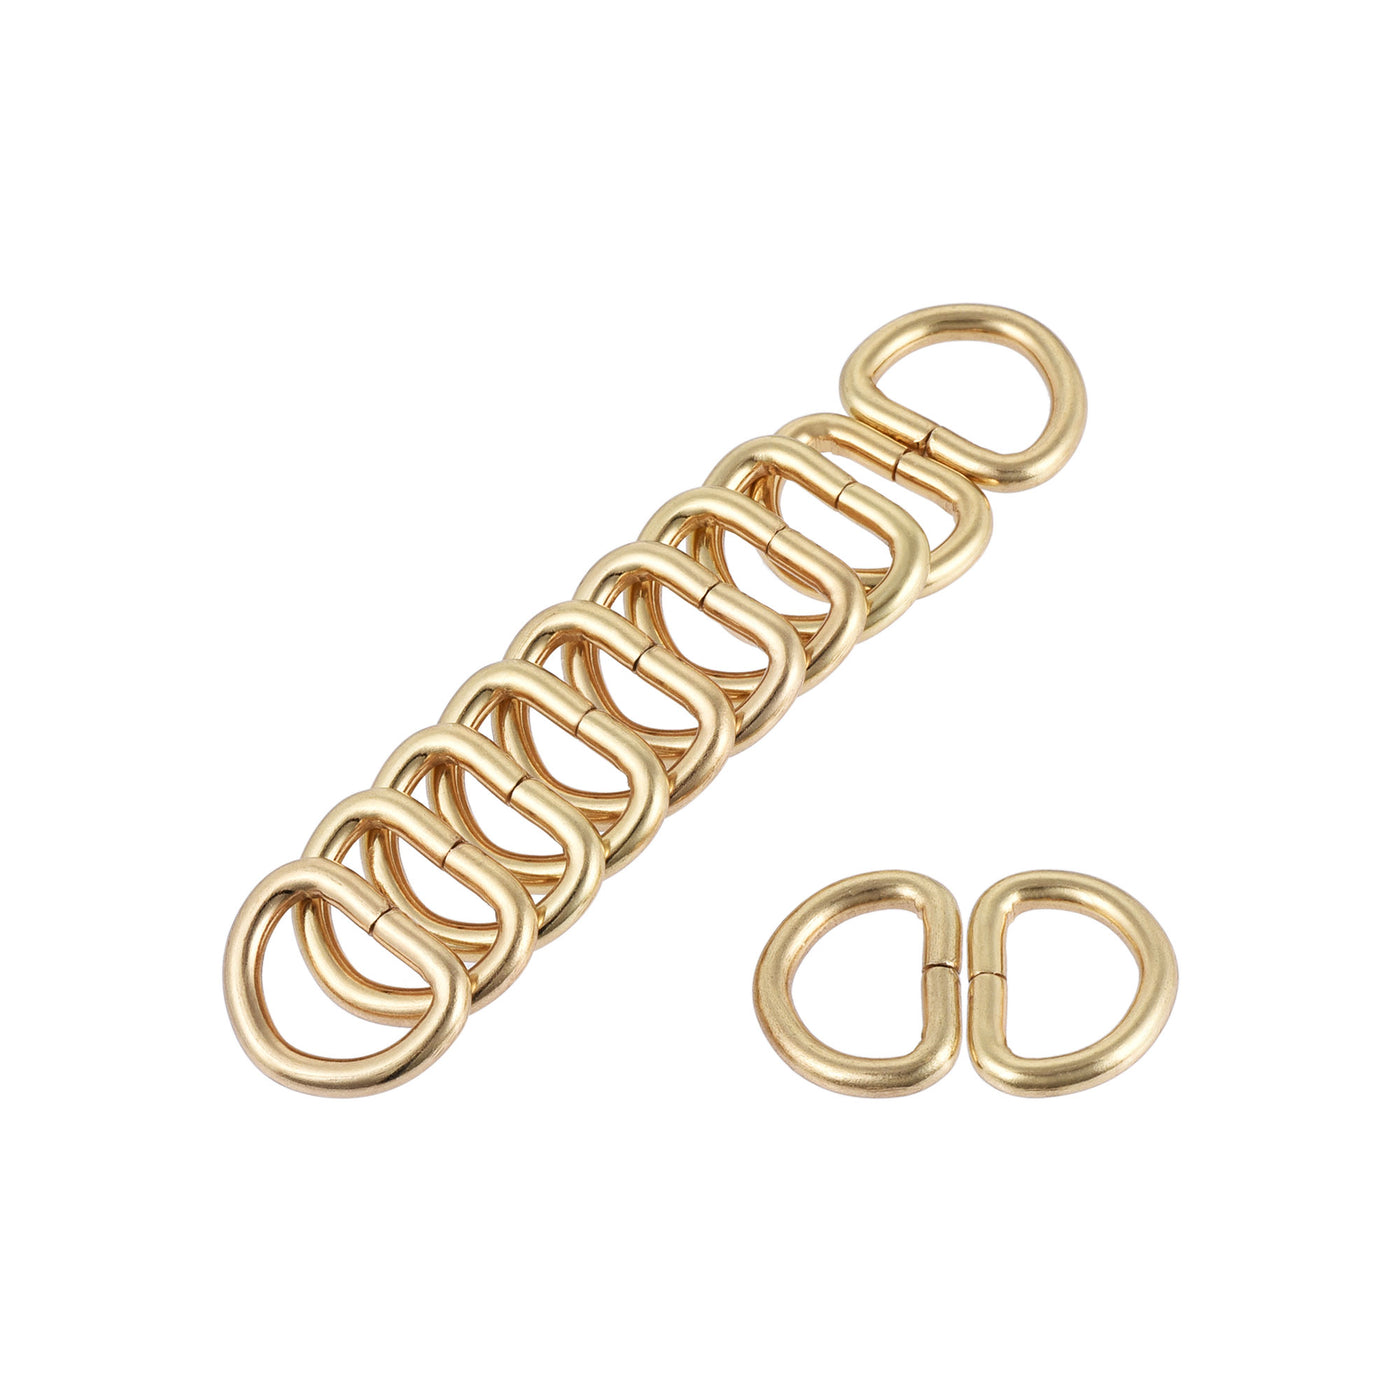 uxcell Uxcell Metal D Ring 0.51"(13mm) D-Rings Buckle for Hardware Bags Belts Craft DIY Accessories Gold Tone 50pcs